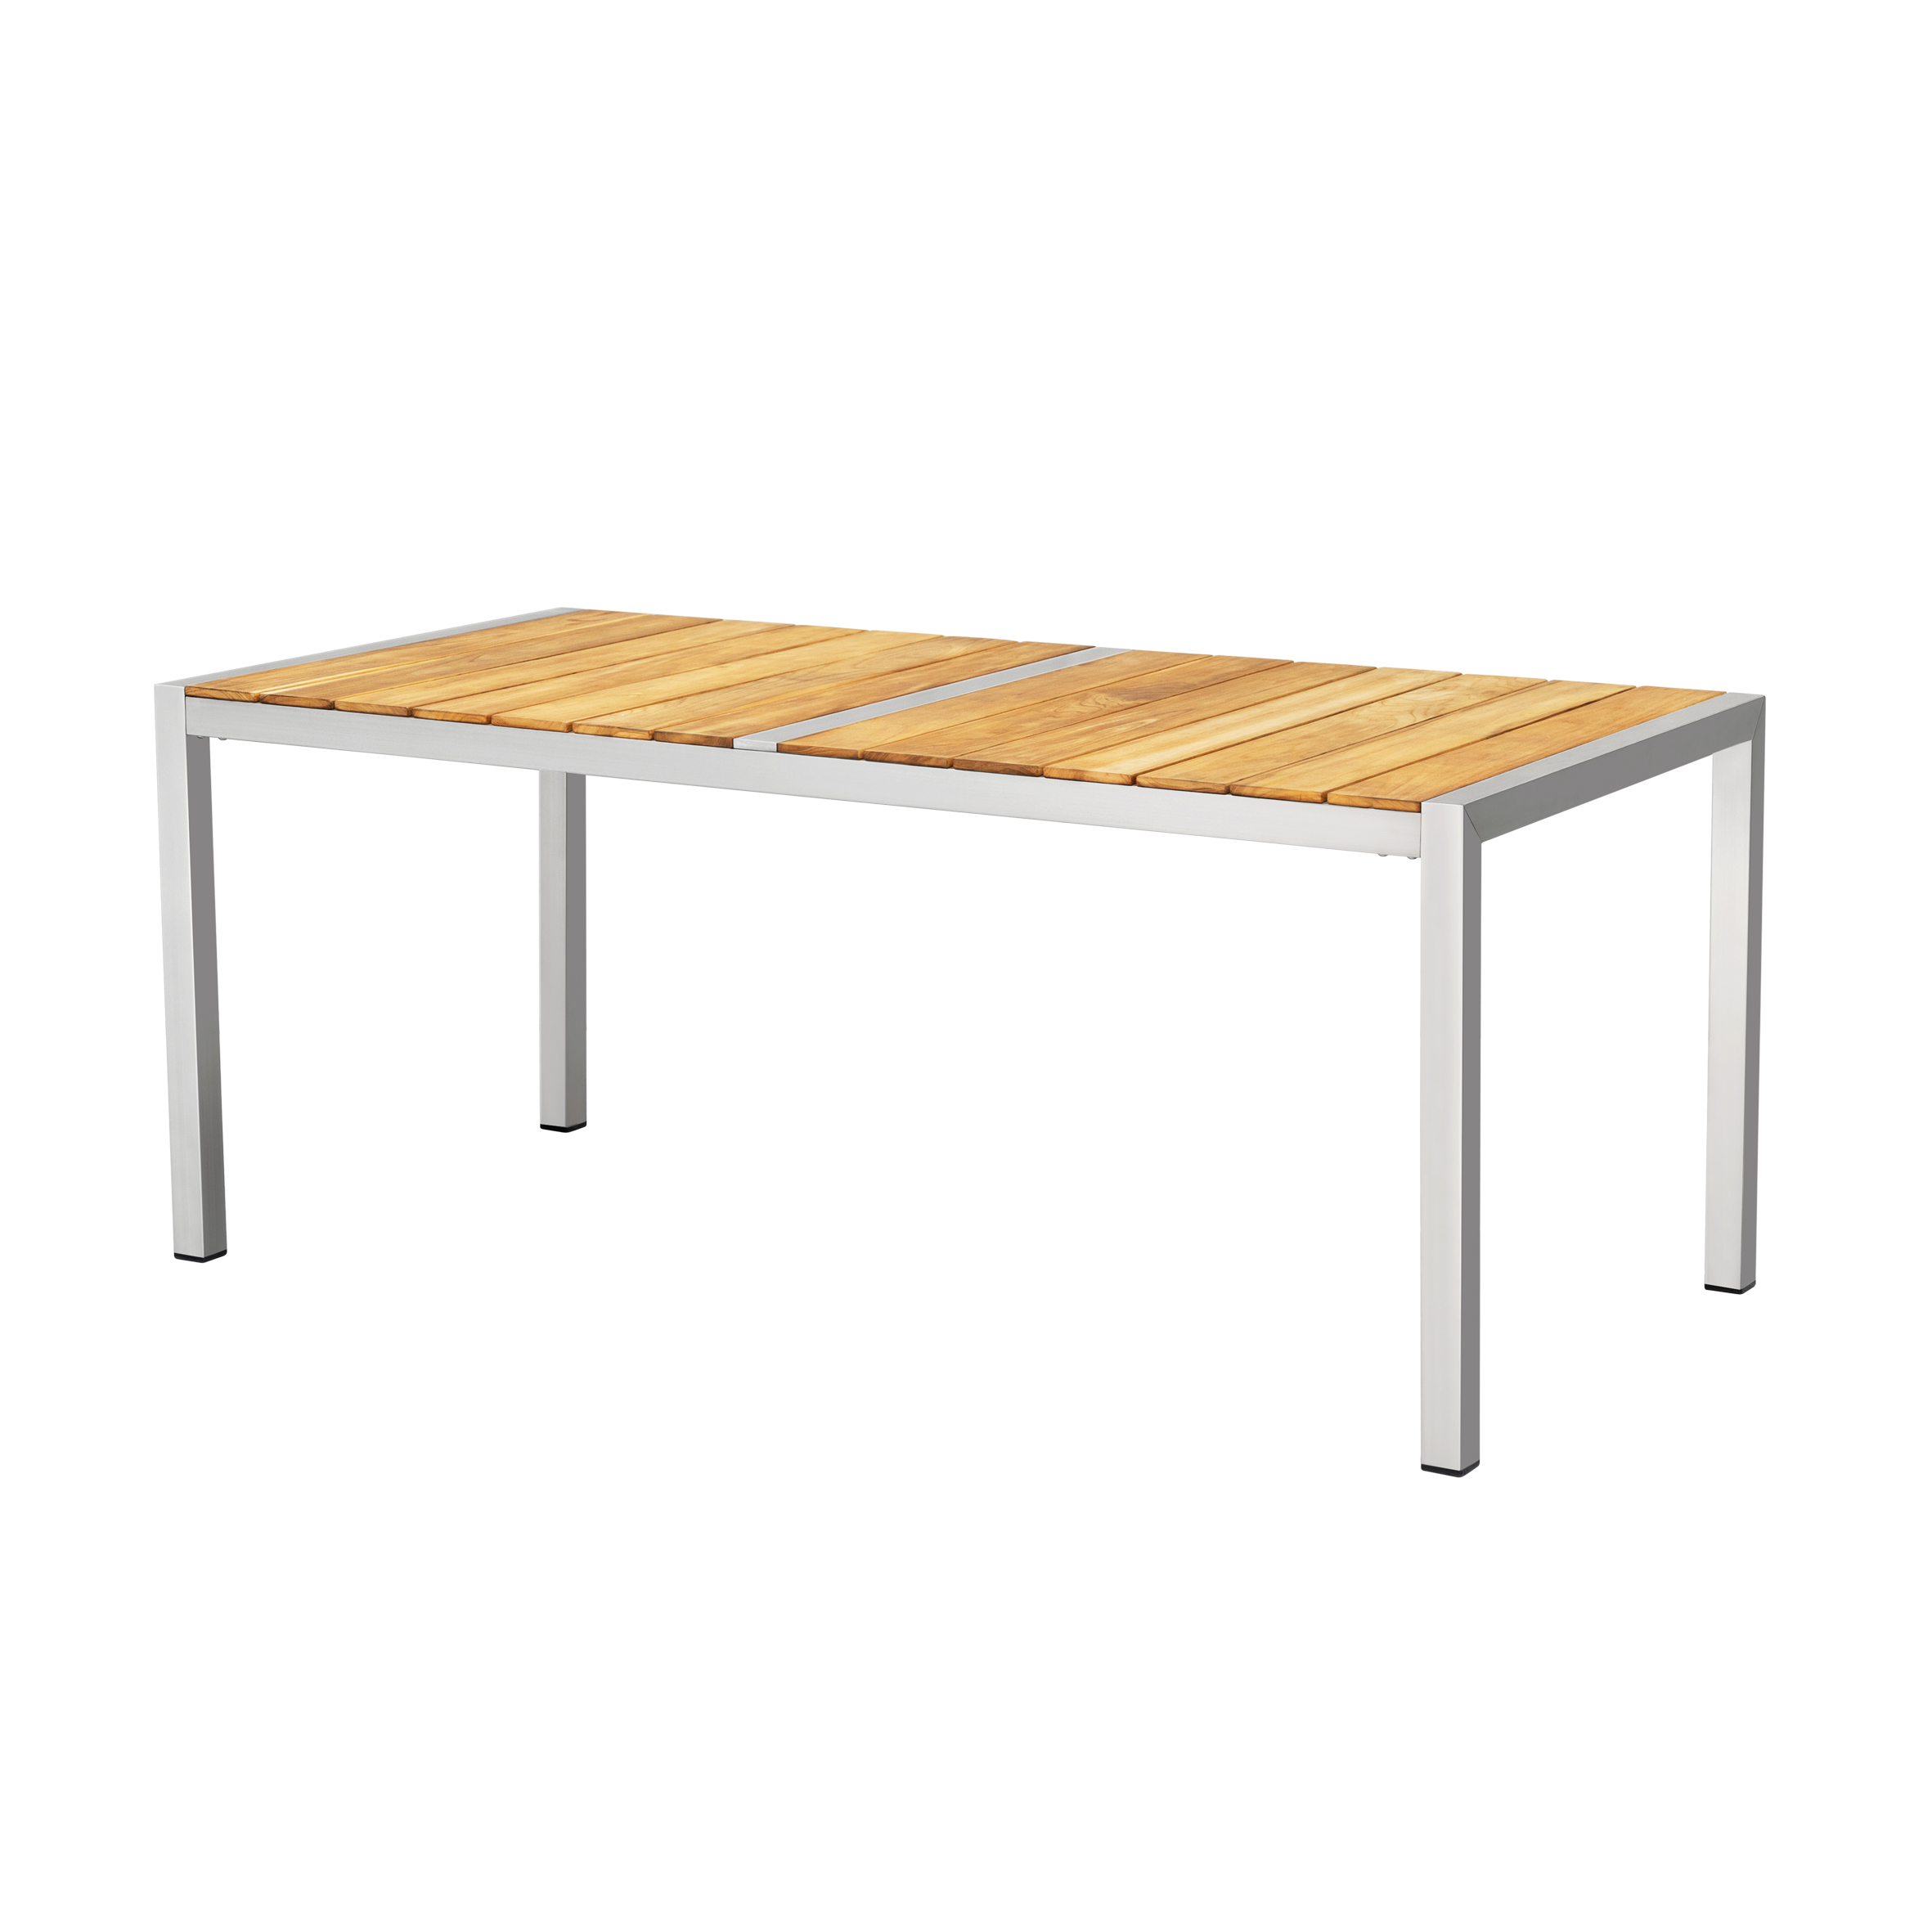 Hills rectangle table S1